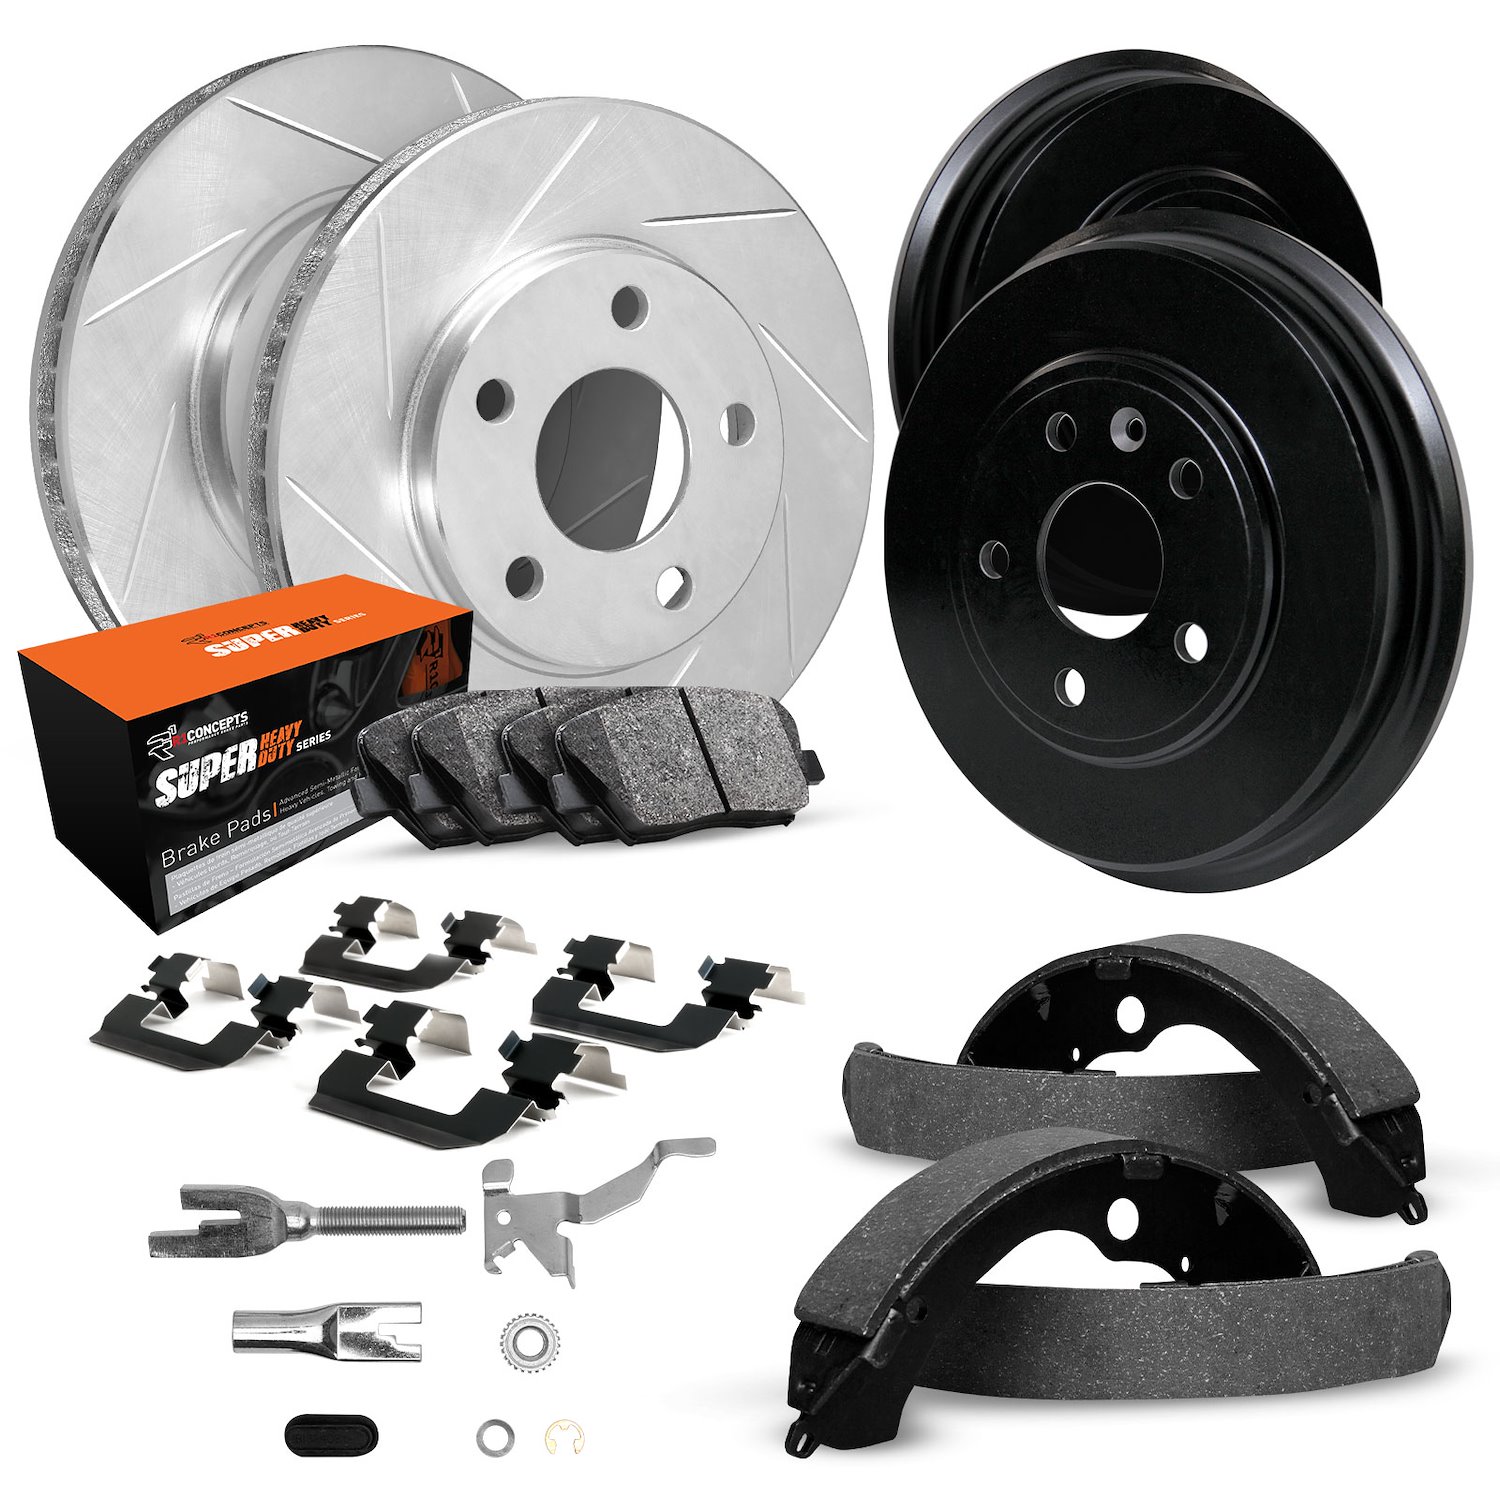 E-Line Slotted Silver Rotor & Drum Set w/Super-Duty Pads, Shoes/Hardware/Adjusters, 1986-1986 Ford/Lincoln/Mercury/Mazda